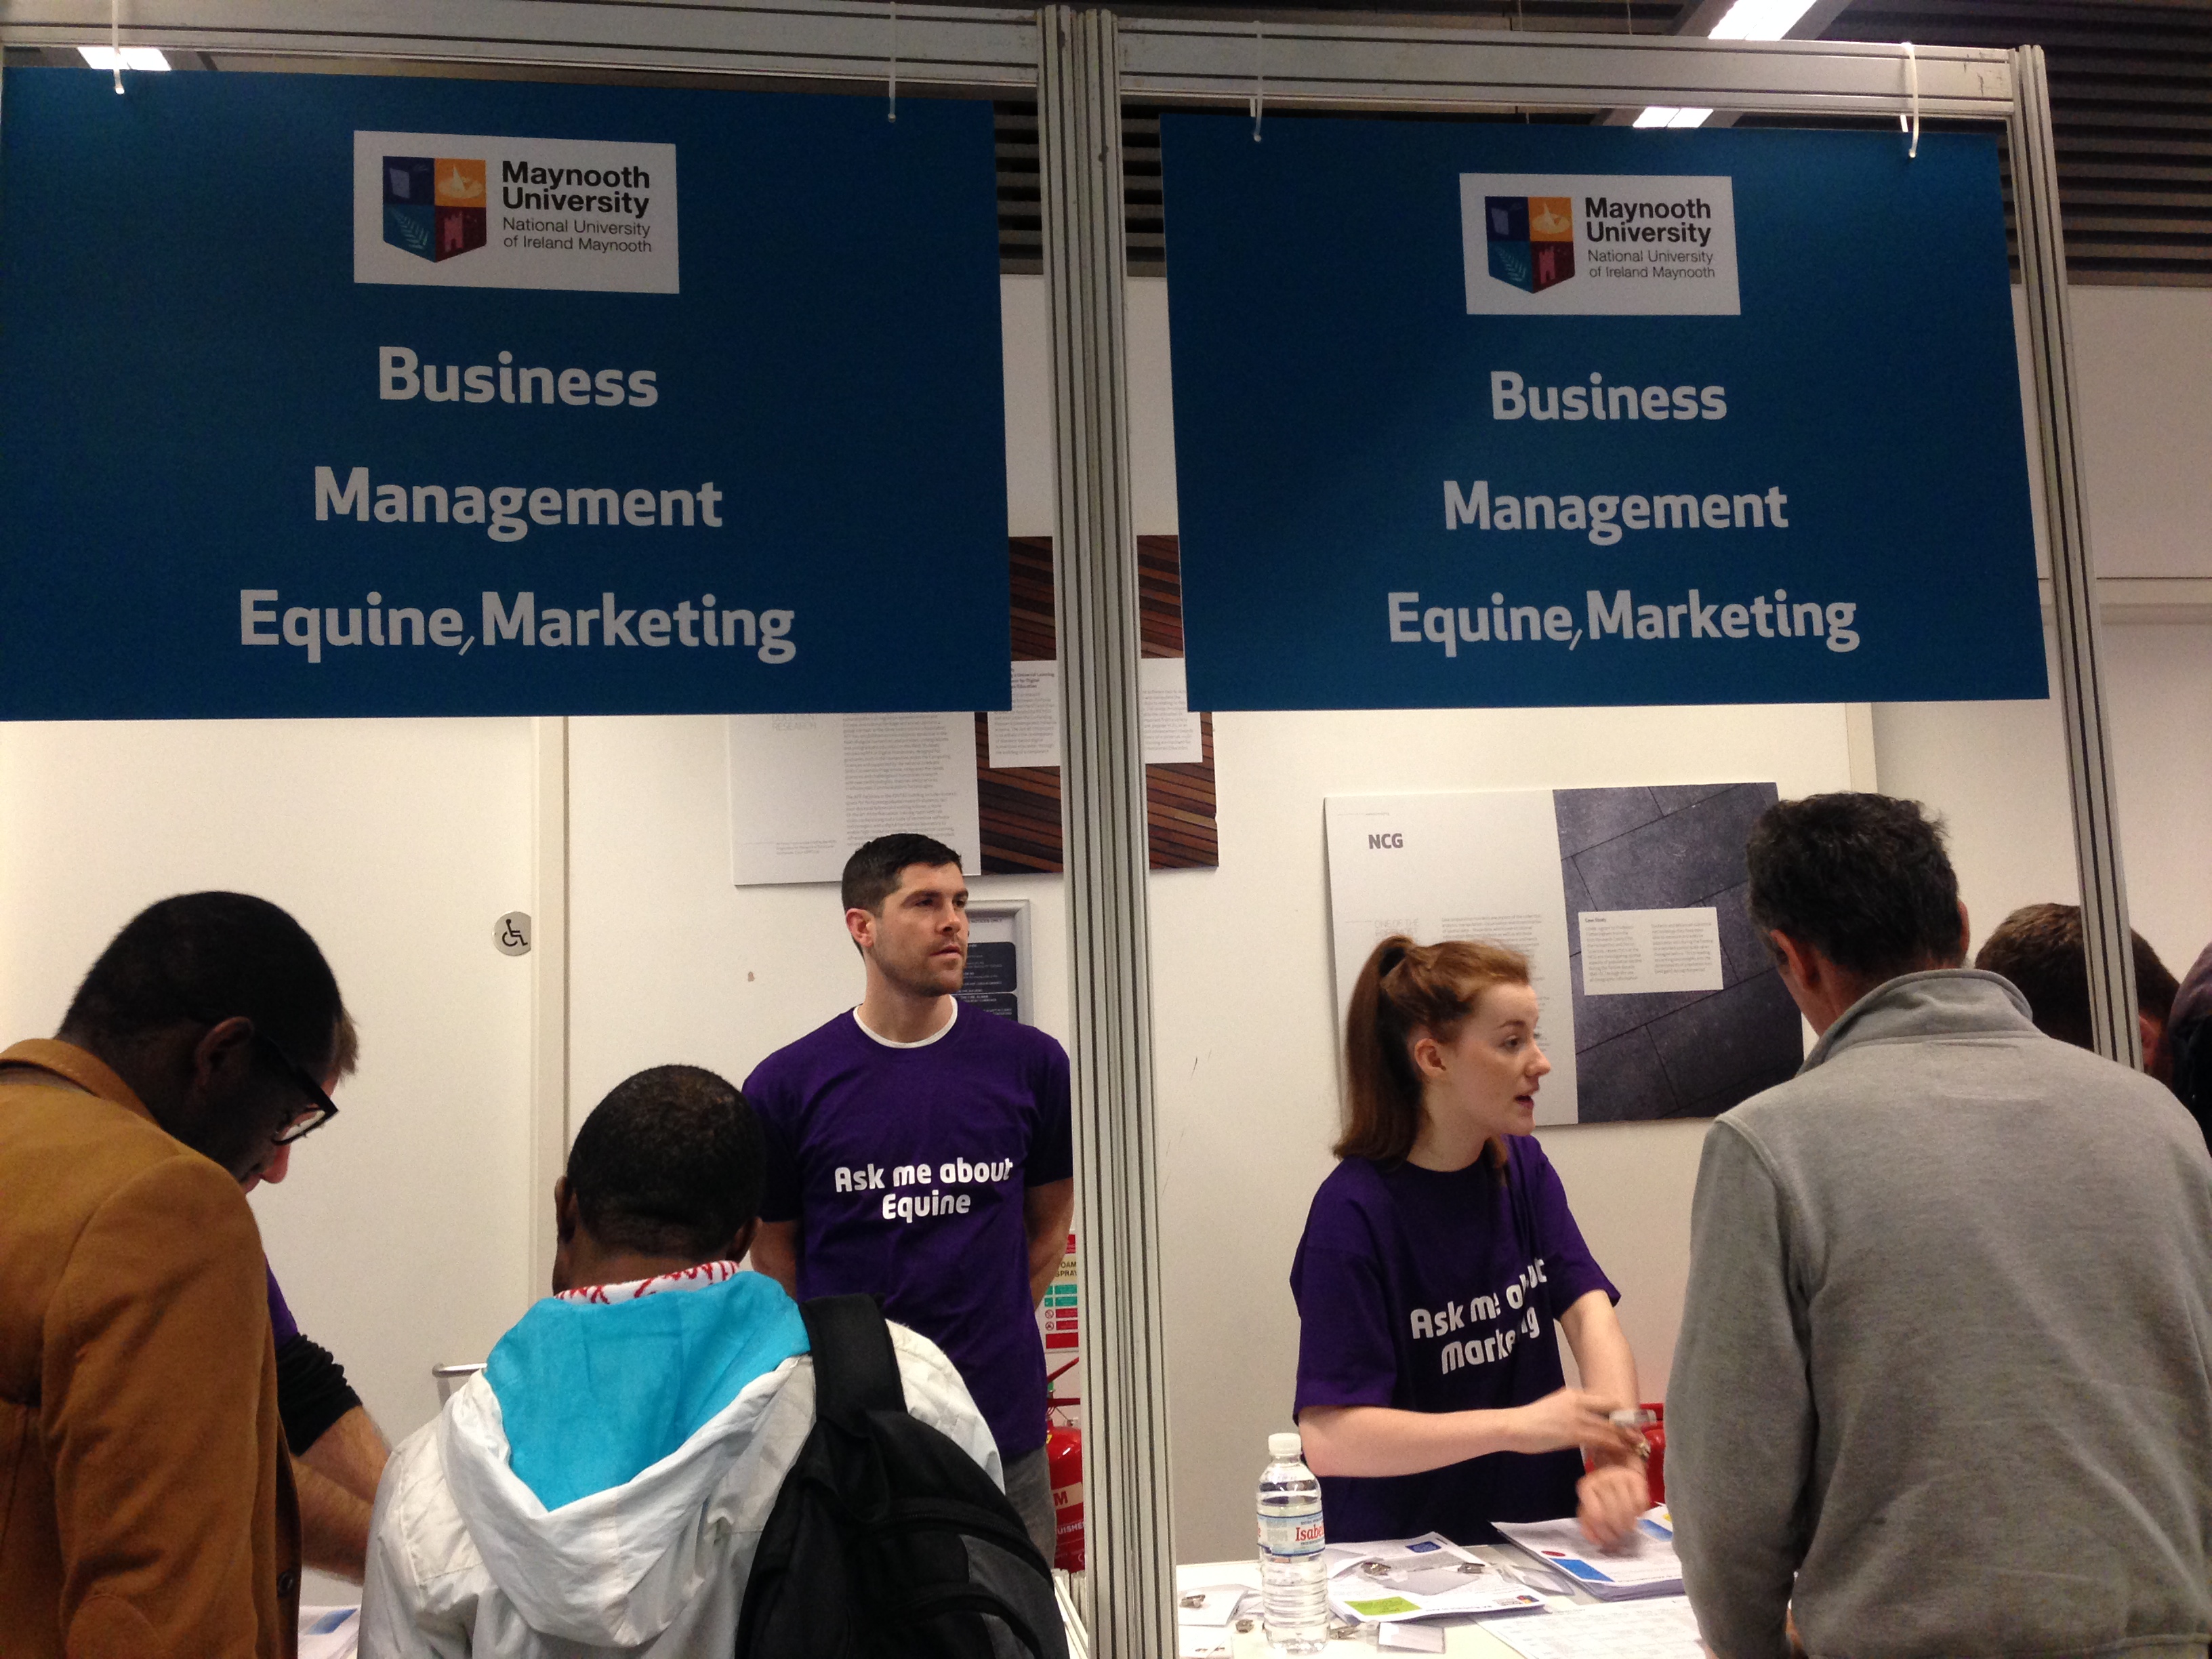 School of Business stand